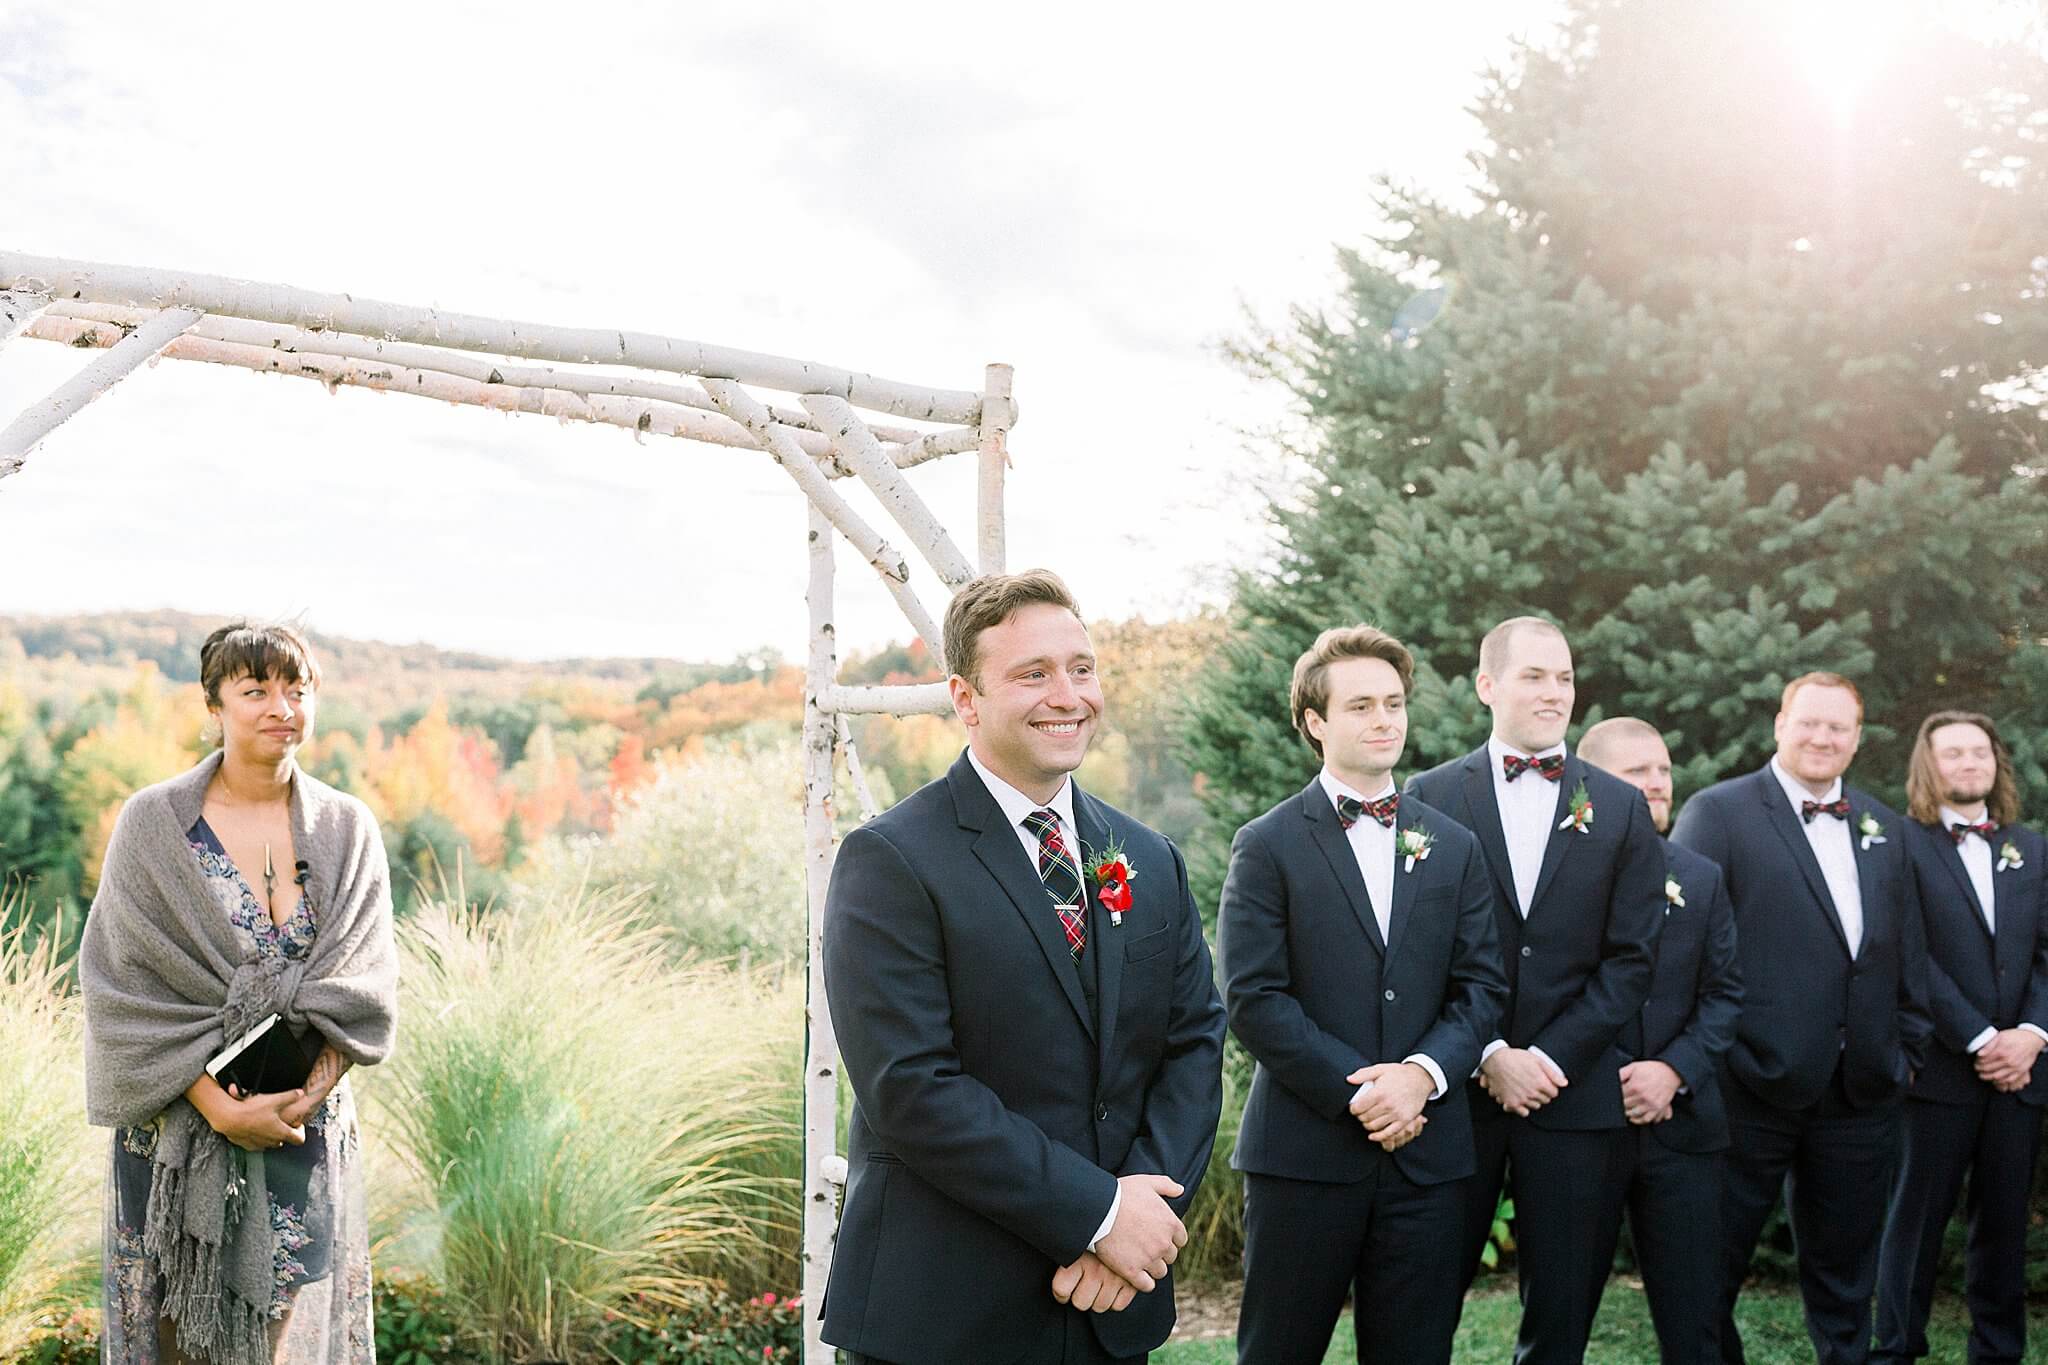 Groom smiles while watching bride walk down the aisle at Timberlee Hills Wedding in Traverse City, Northern Michigan.